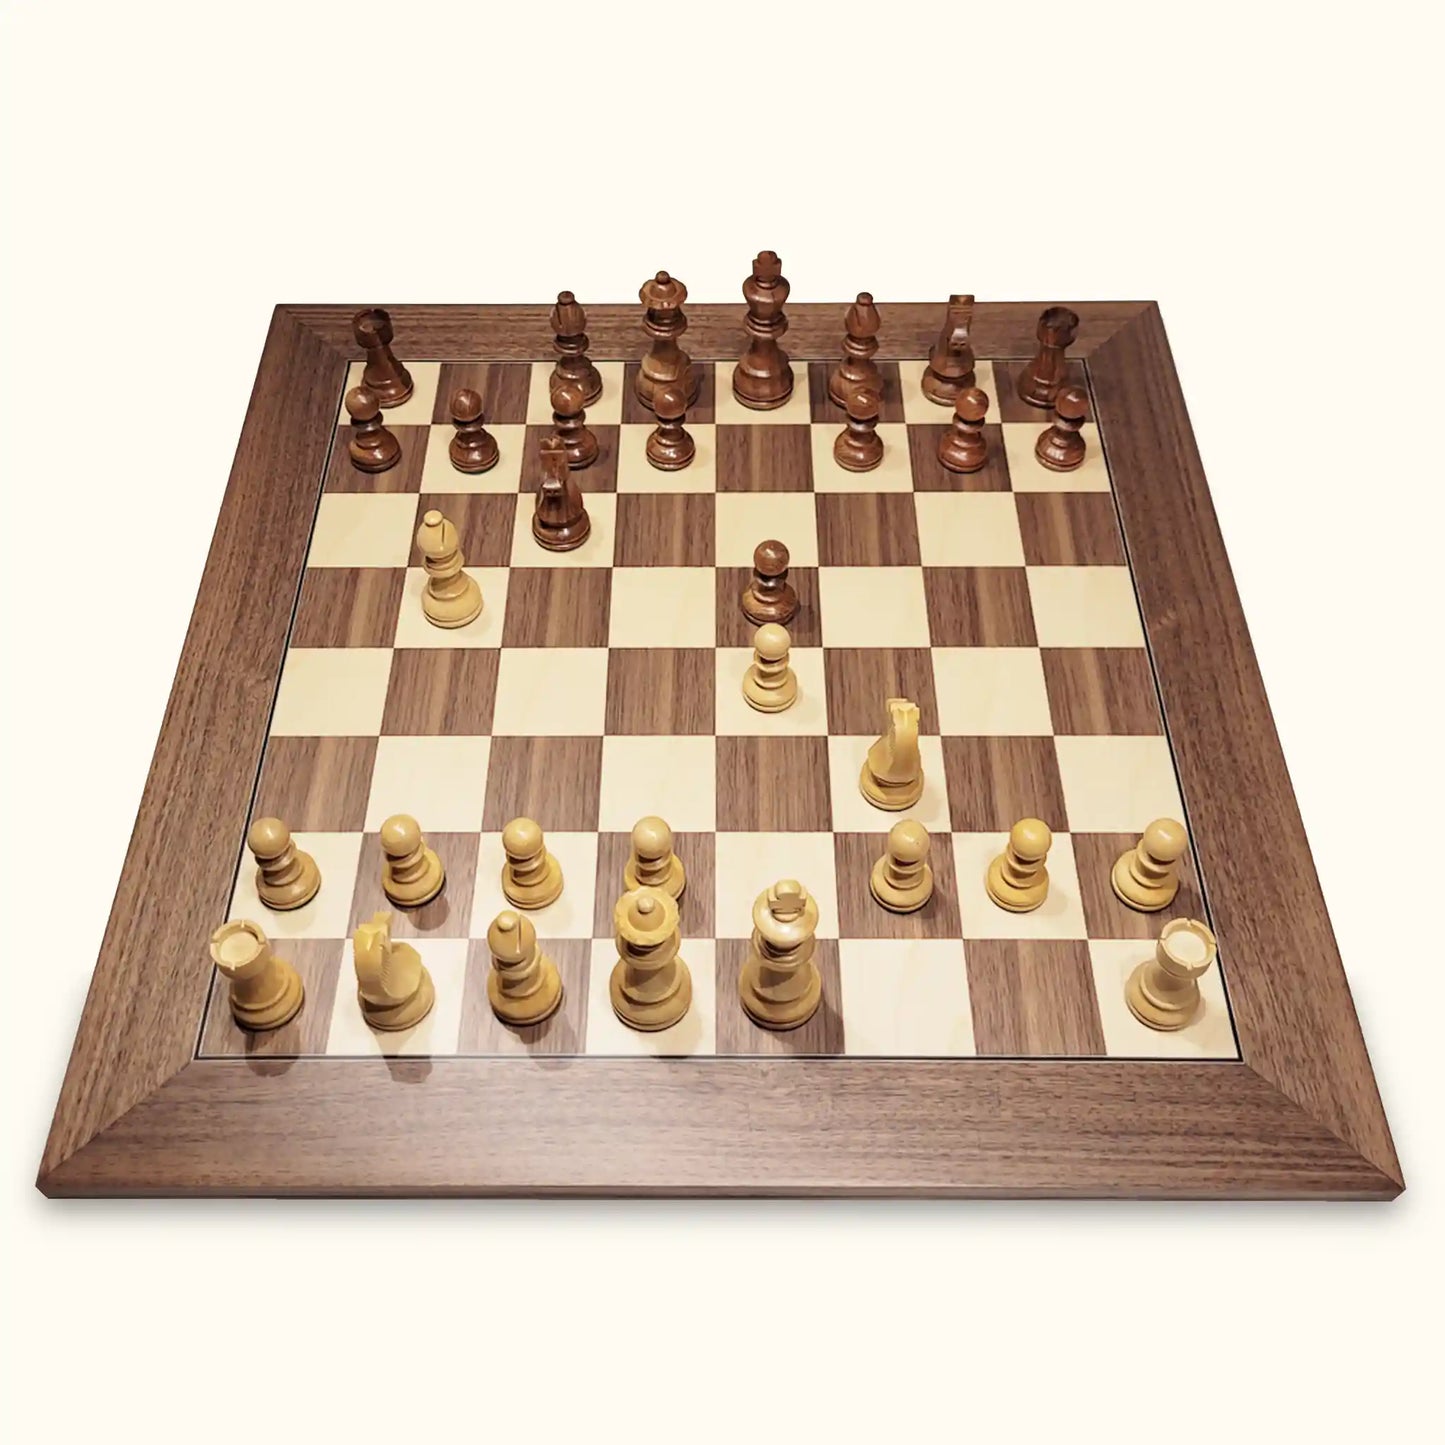 Chessboard walnut deluxe with chess pieces german knight top